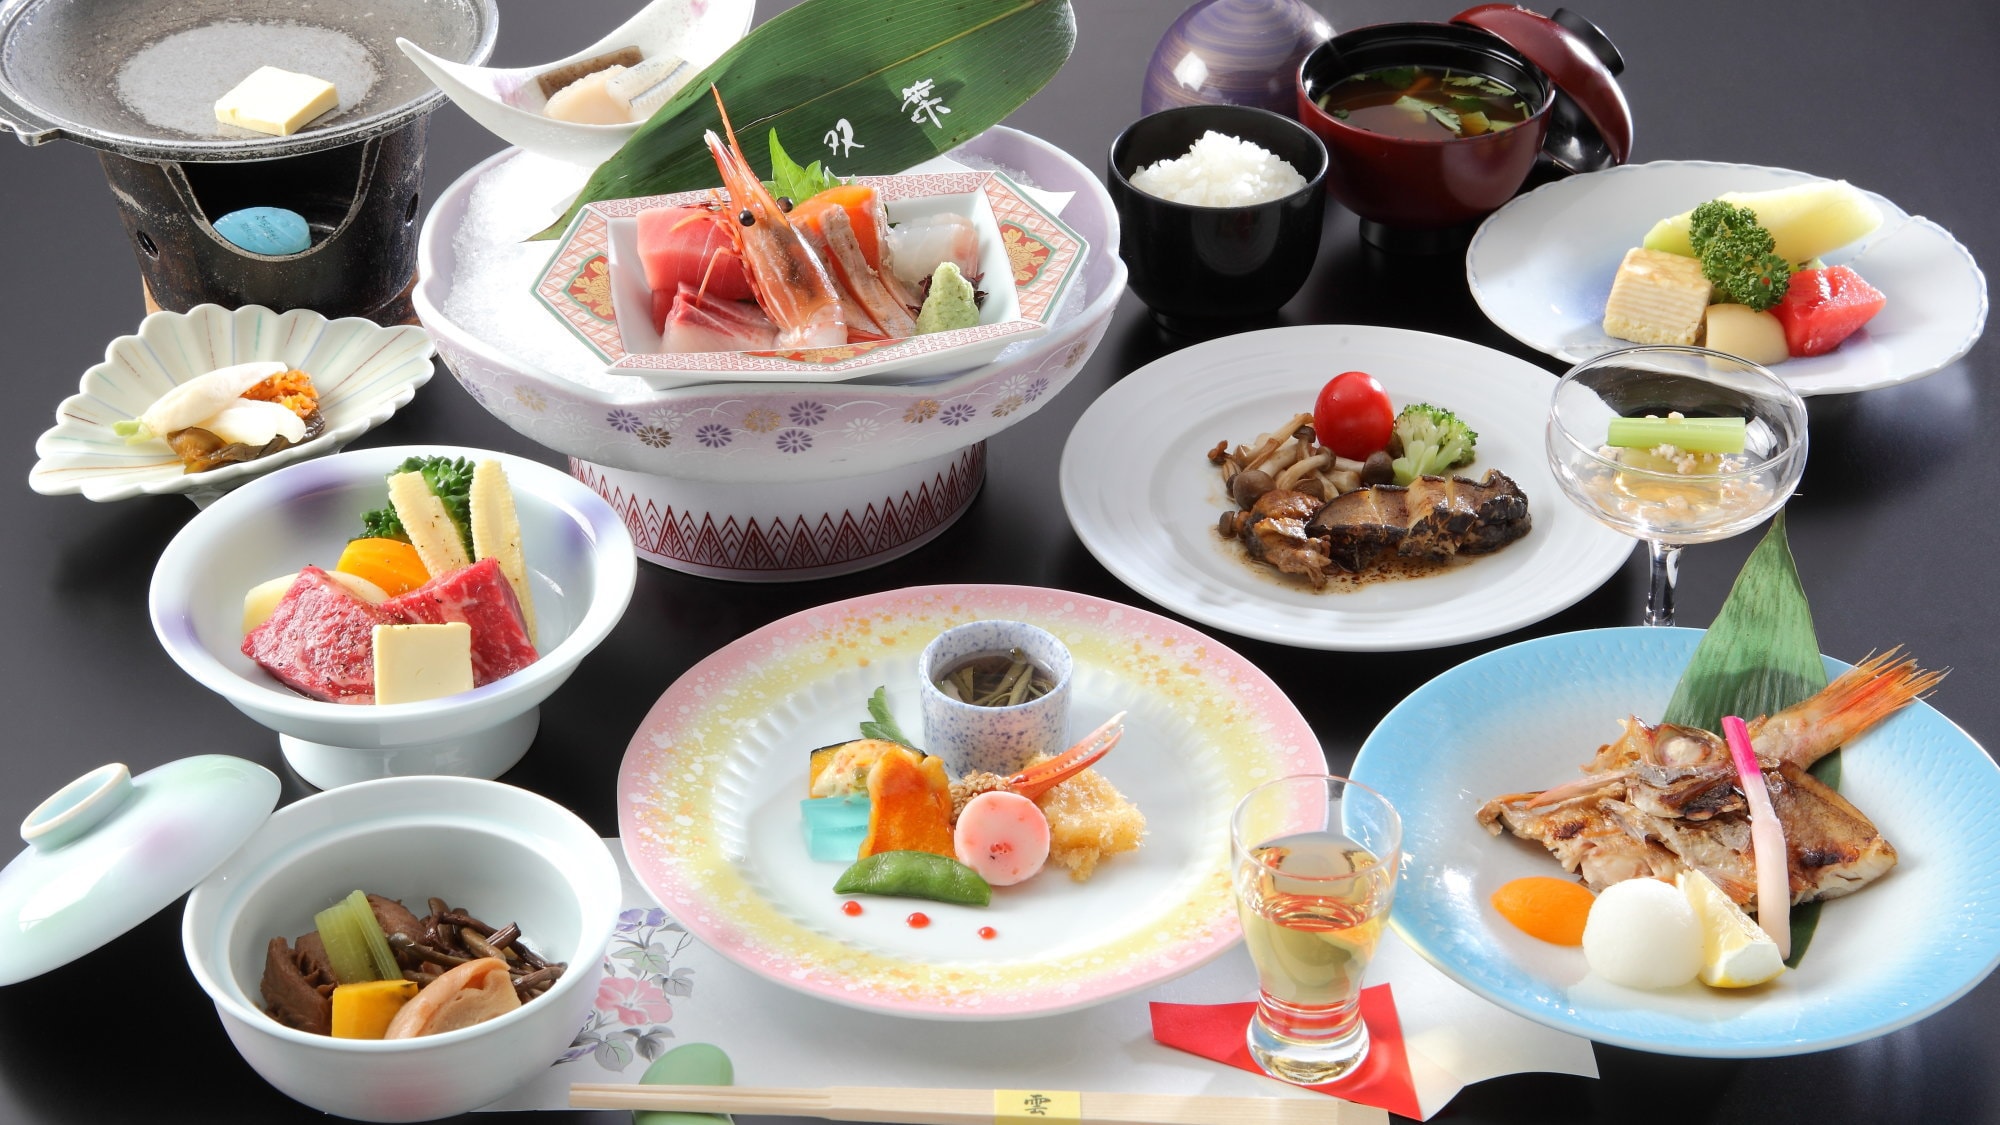 Delicious small amount "Ya Plan" Special kaiseki meal using carefully selected high-quality ingredients